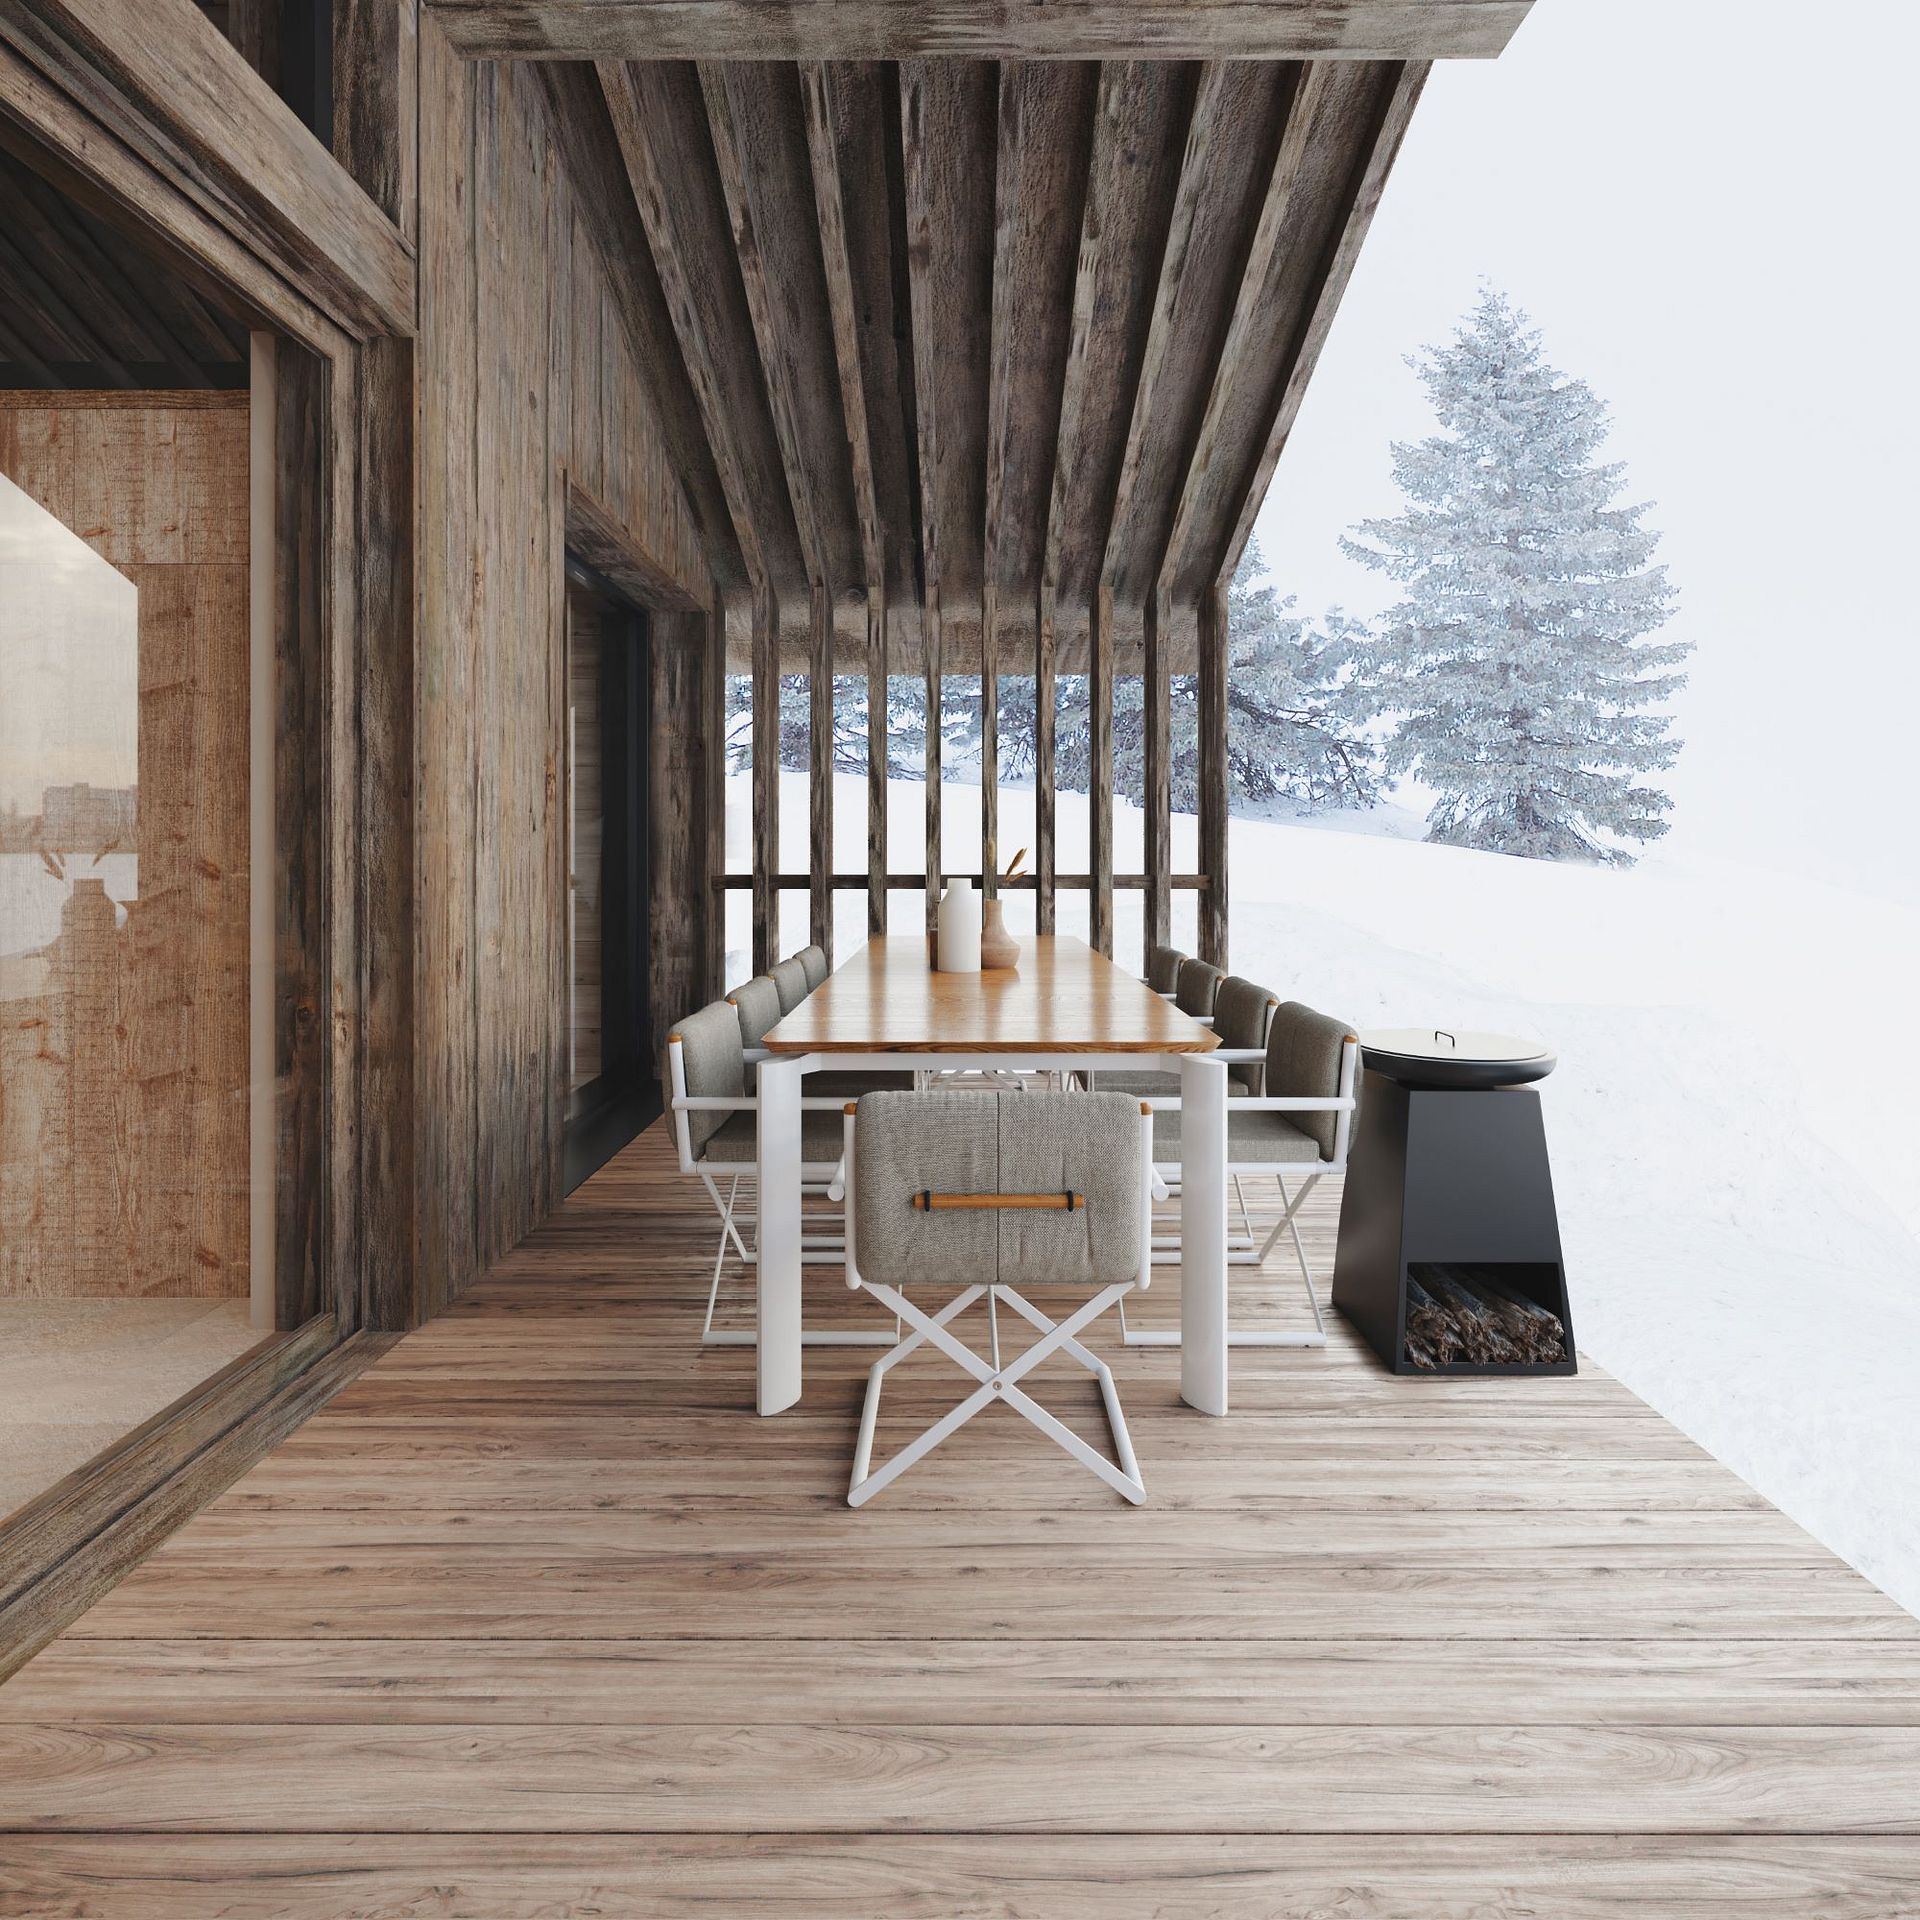 5 bed Chalet For Sale in Paradiski, French Alps